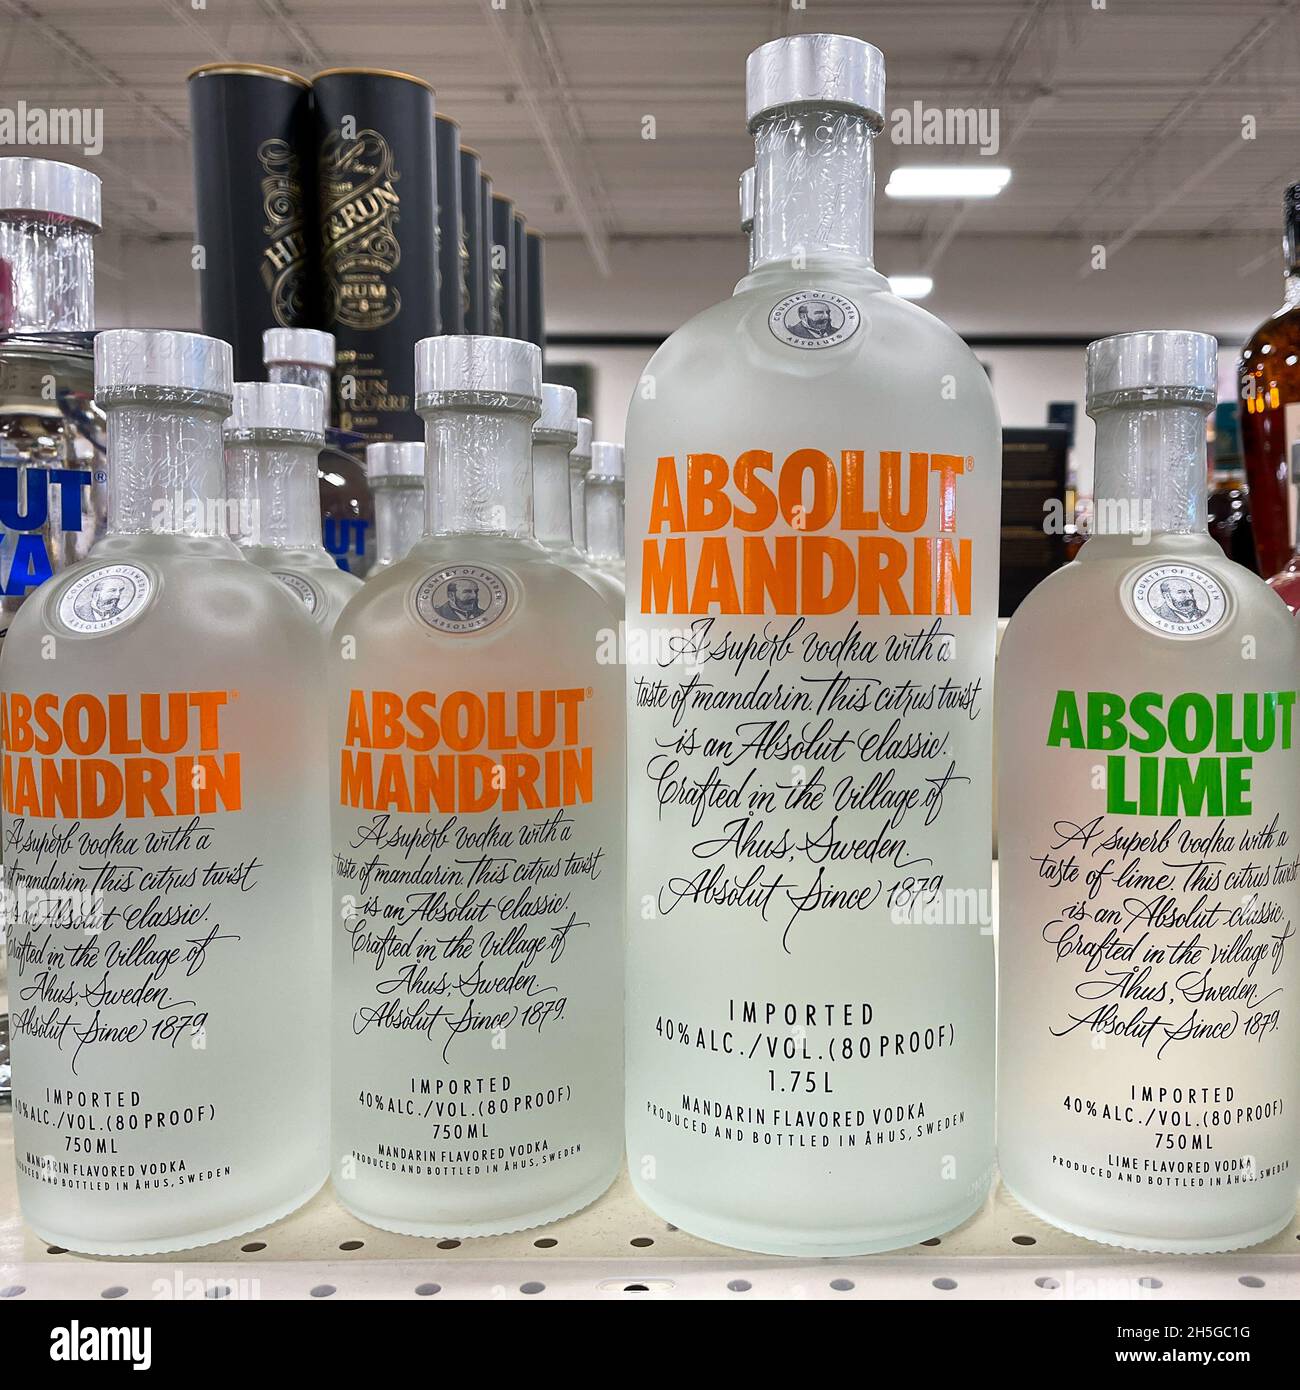 A display of bottles of  flavored Absolut Vodka with background bokeh at a Binneys liqour store in Springfield, Illinois. Stock Photo